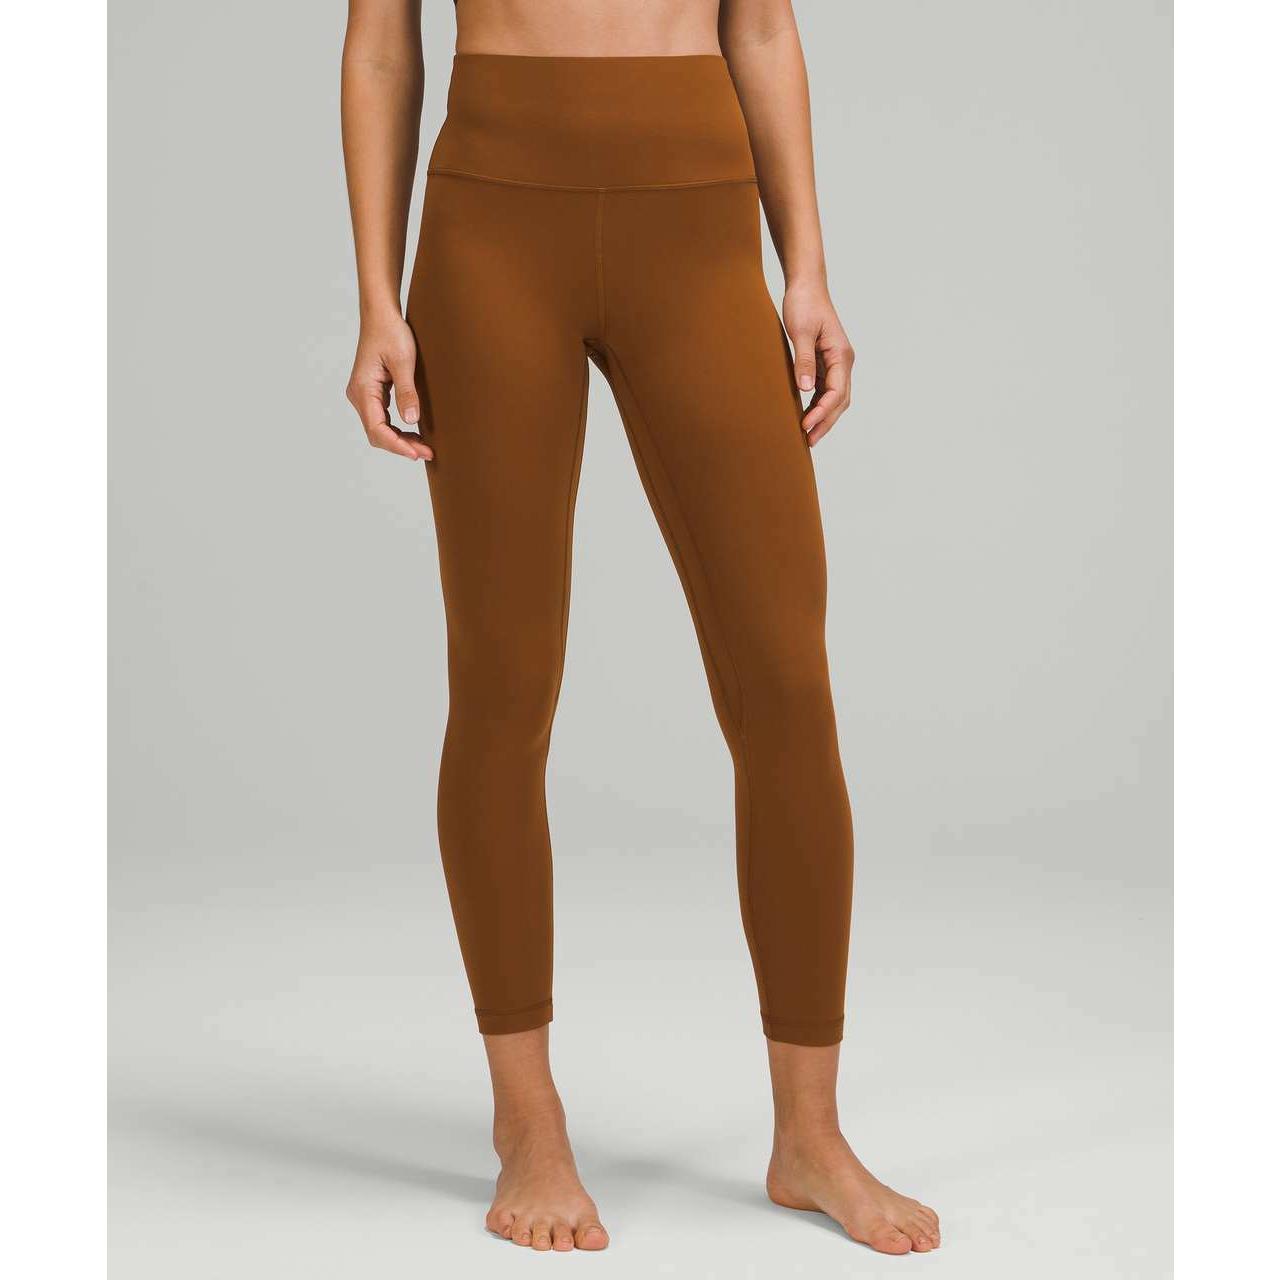 Lululemon Align HR Pant 25 Tight Copb Copper Brown 16 W/tag